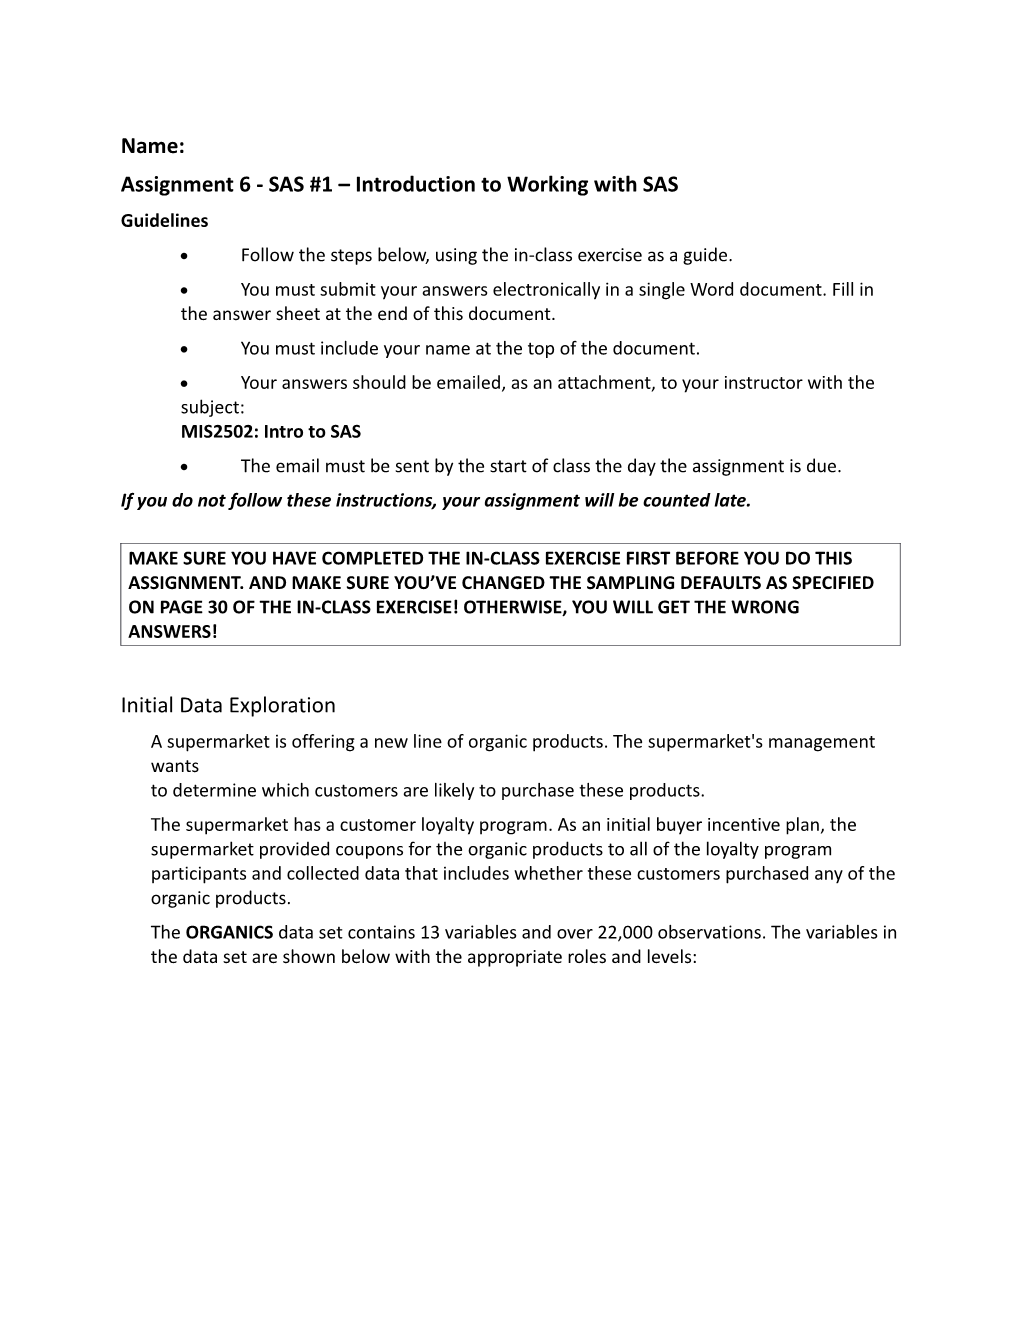 Assignment 6 - SAS #1 Introduction to Working with SAS